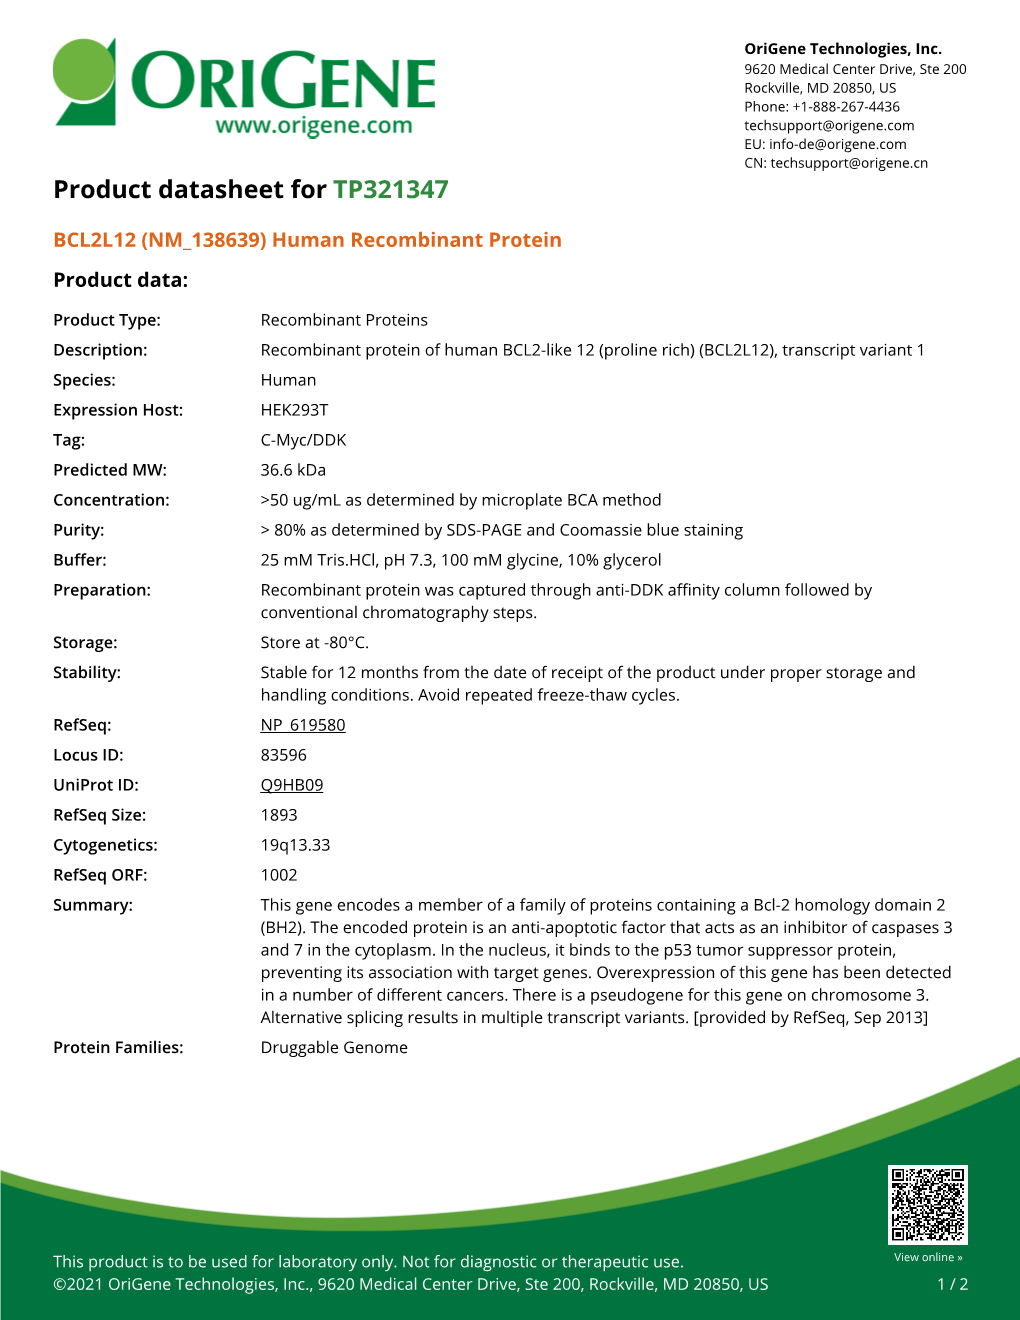 BCL2L12 (NM 138639) Human Recombinant Protein Product Data